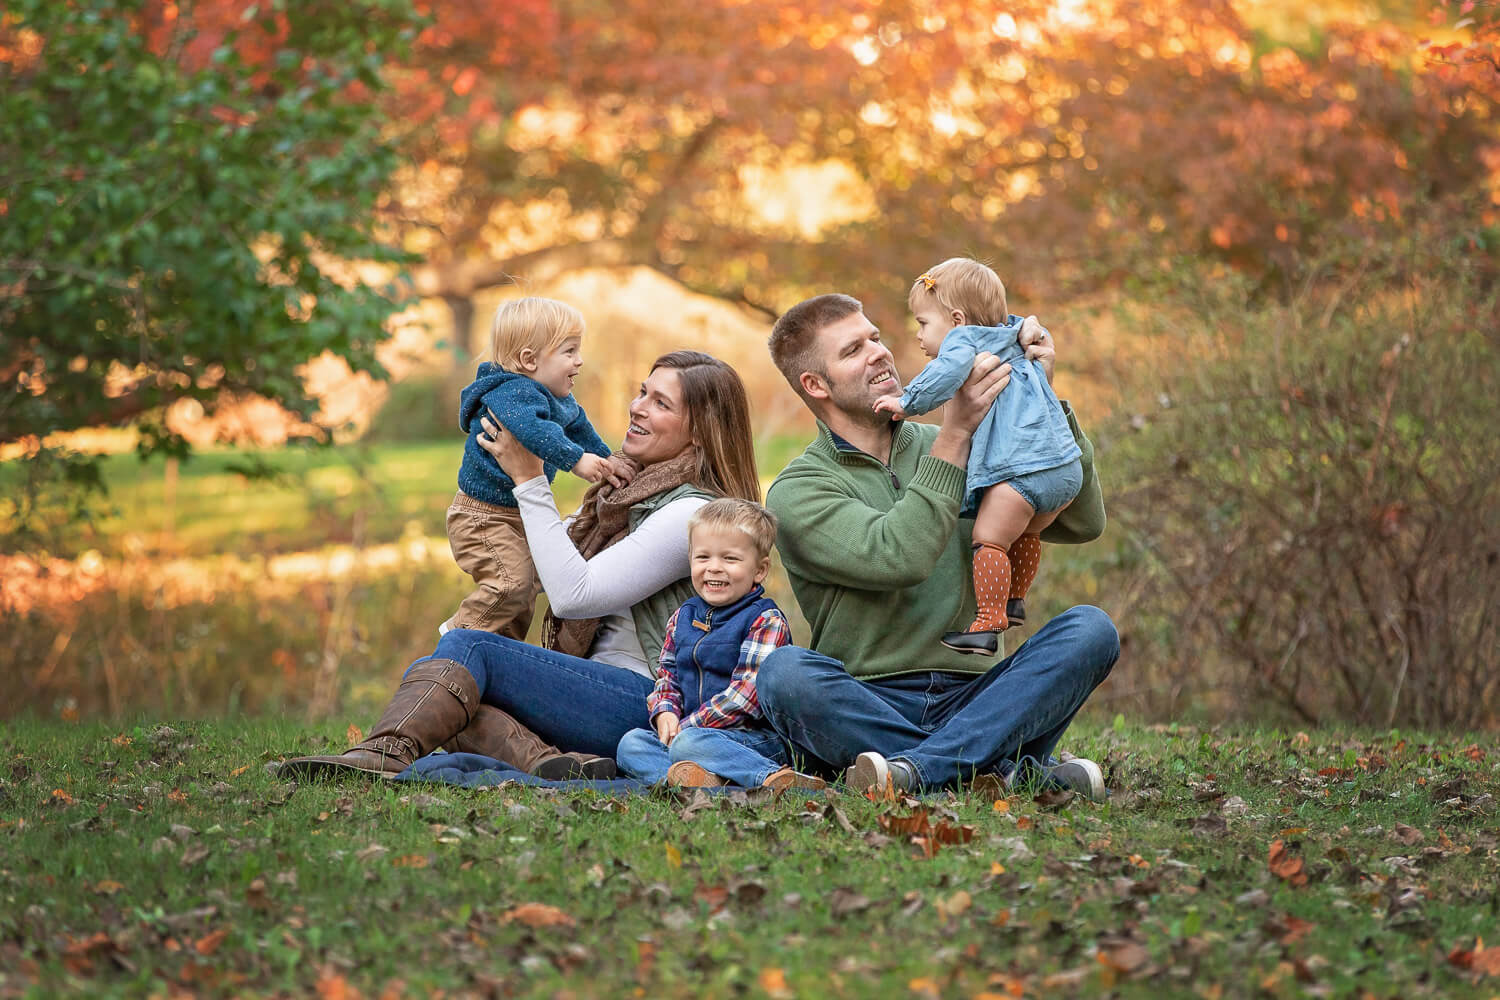 Family of 5 interacting on a blanket on the grass surrounded by bright fall leaves